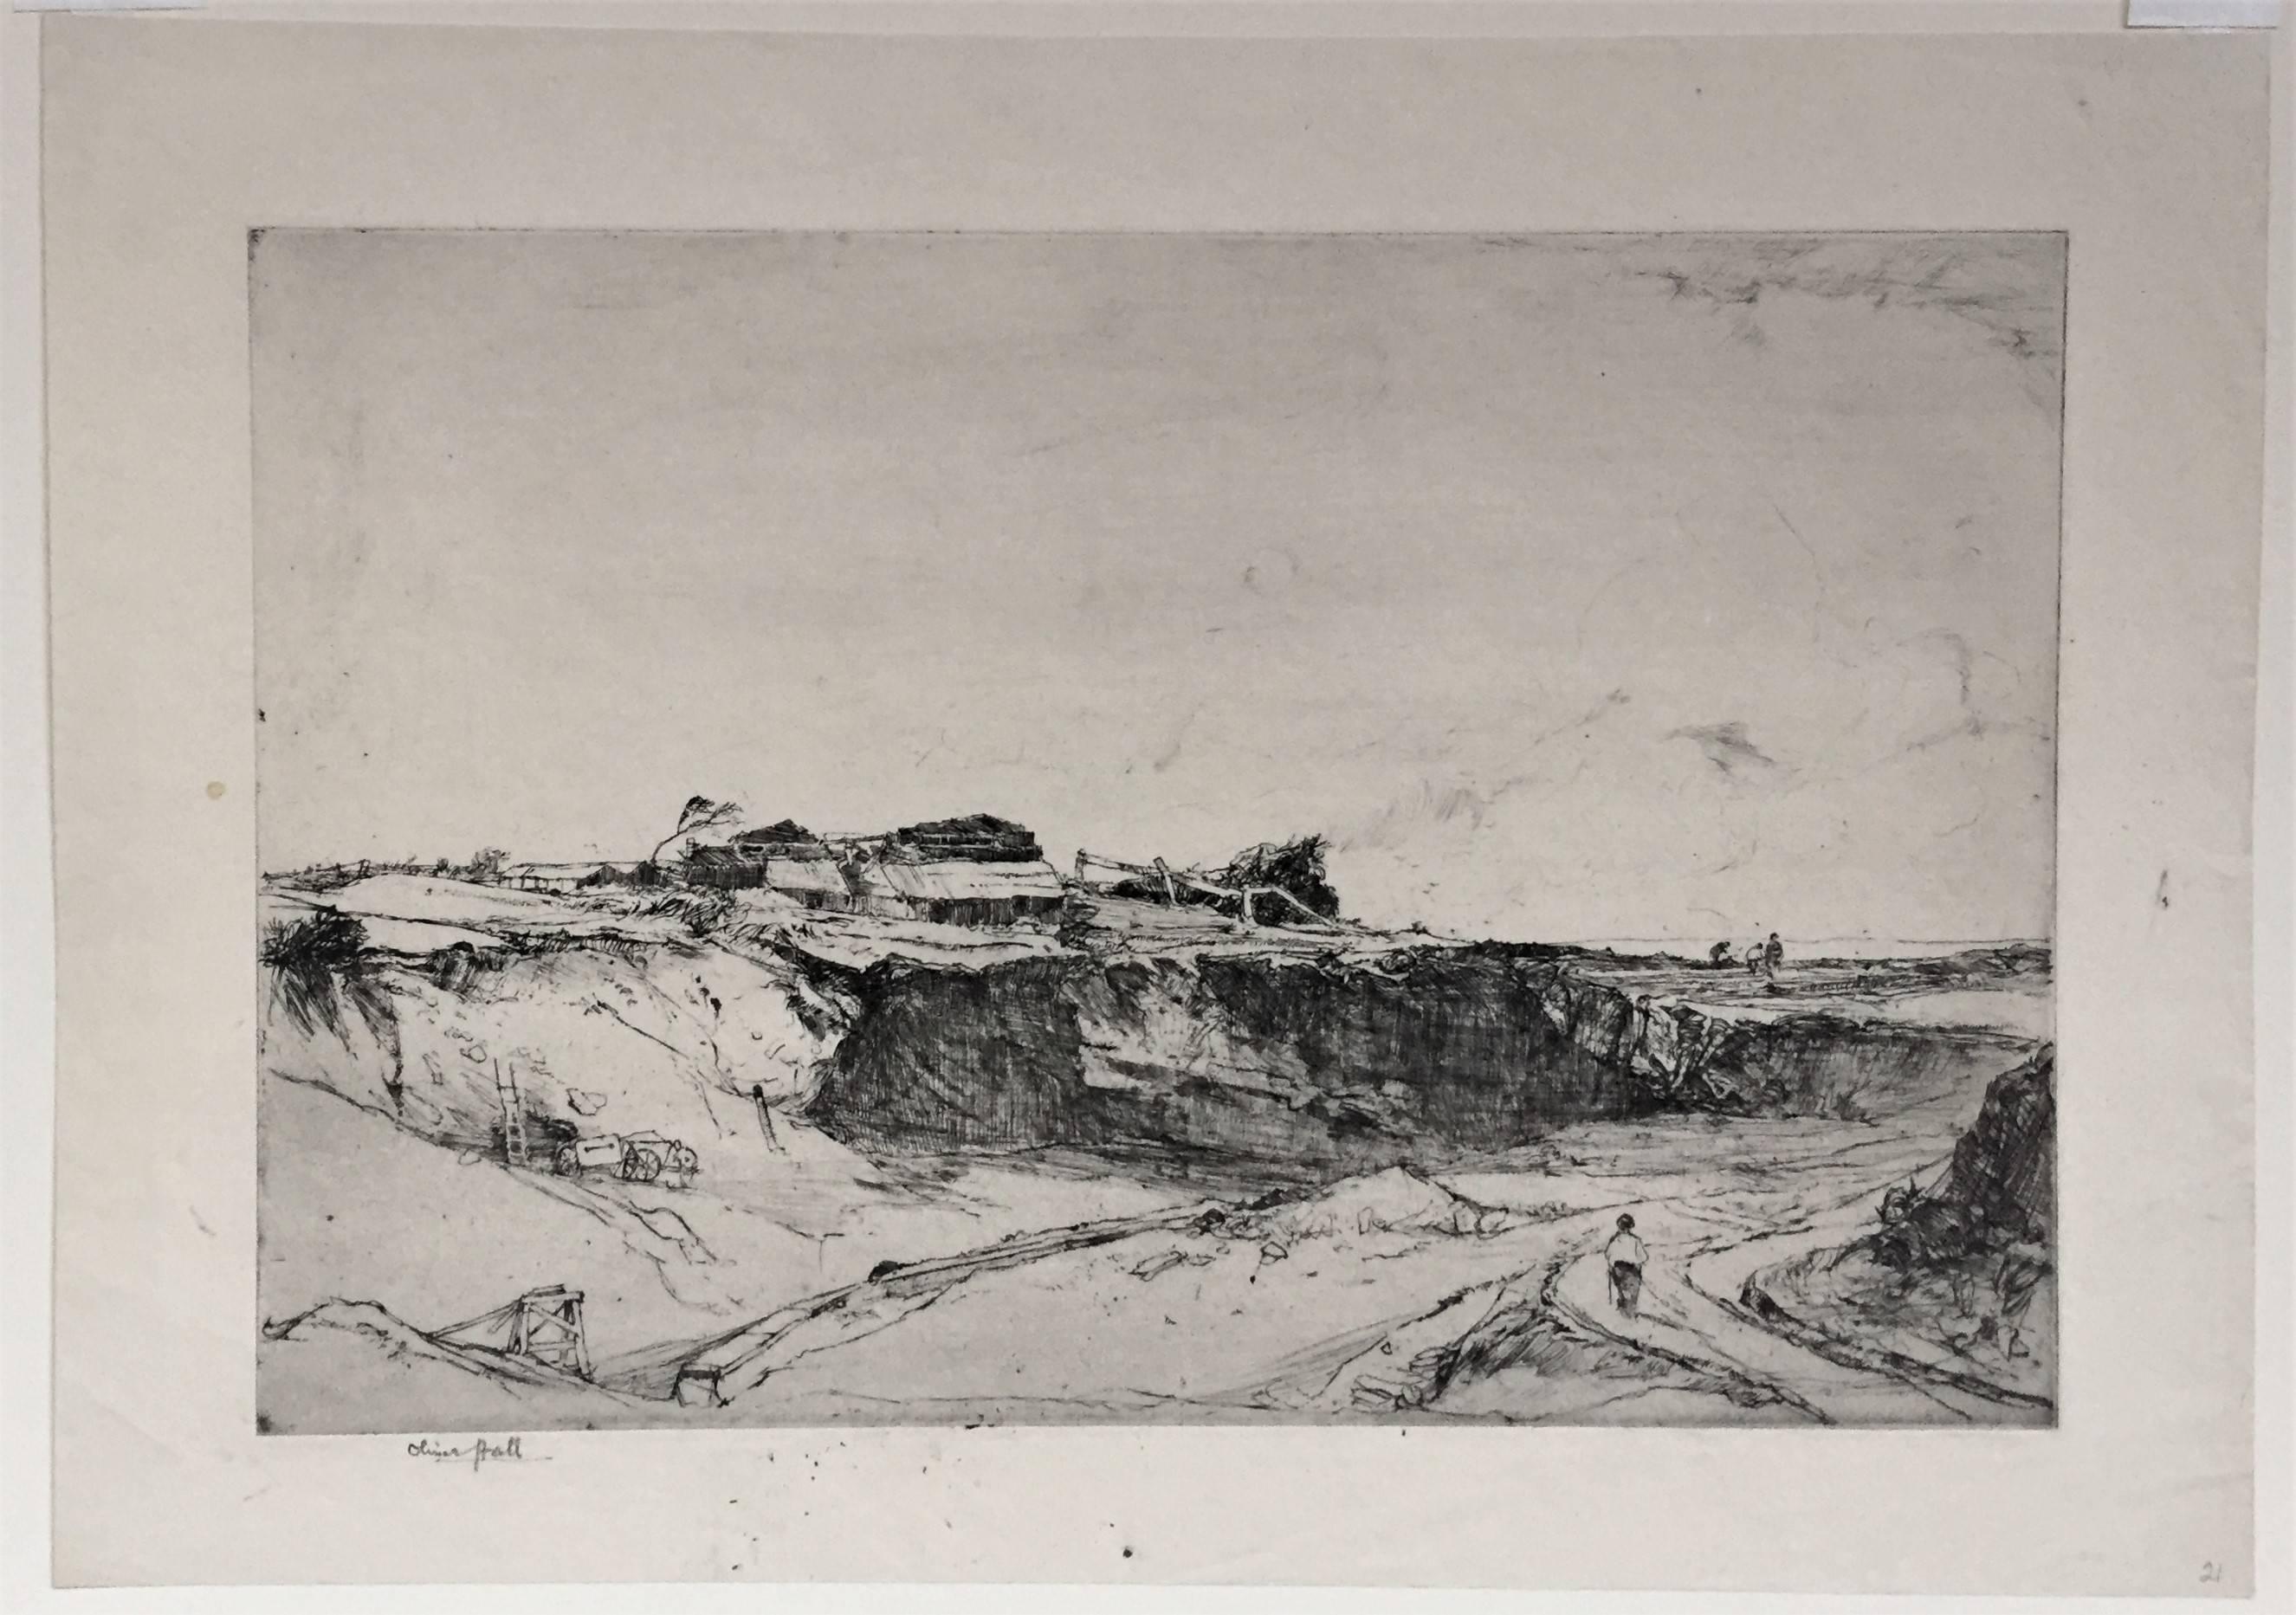 Broughton Moor Pits, Durham - Print by Oliver Hall, R.A., R.E., R.S.W.